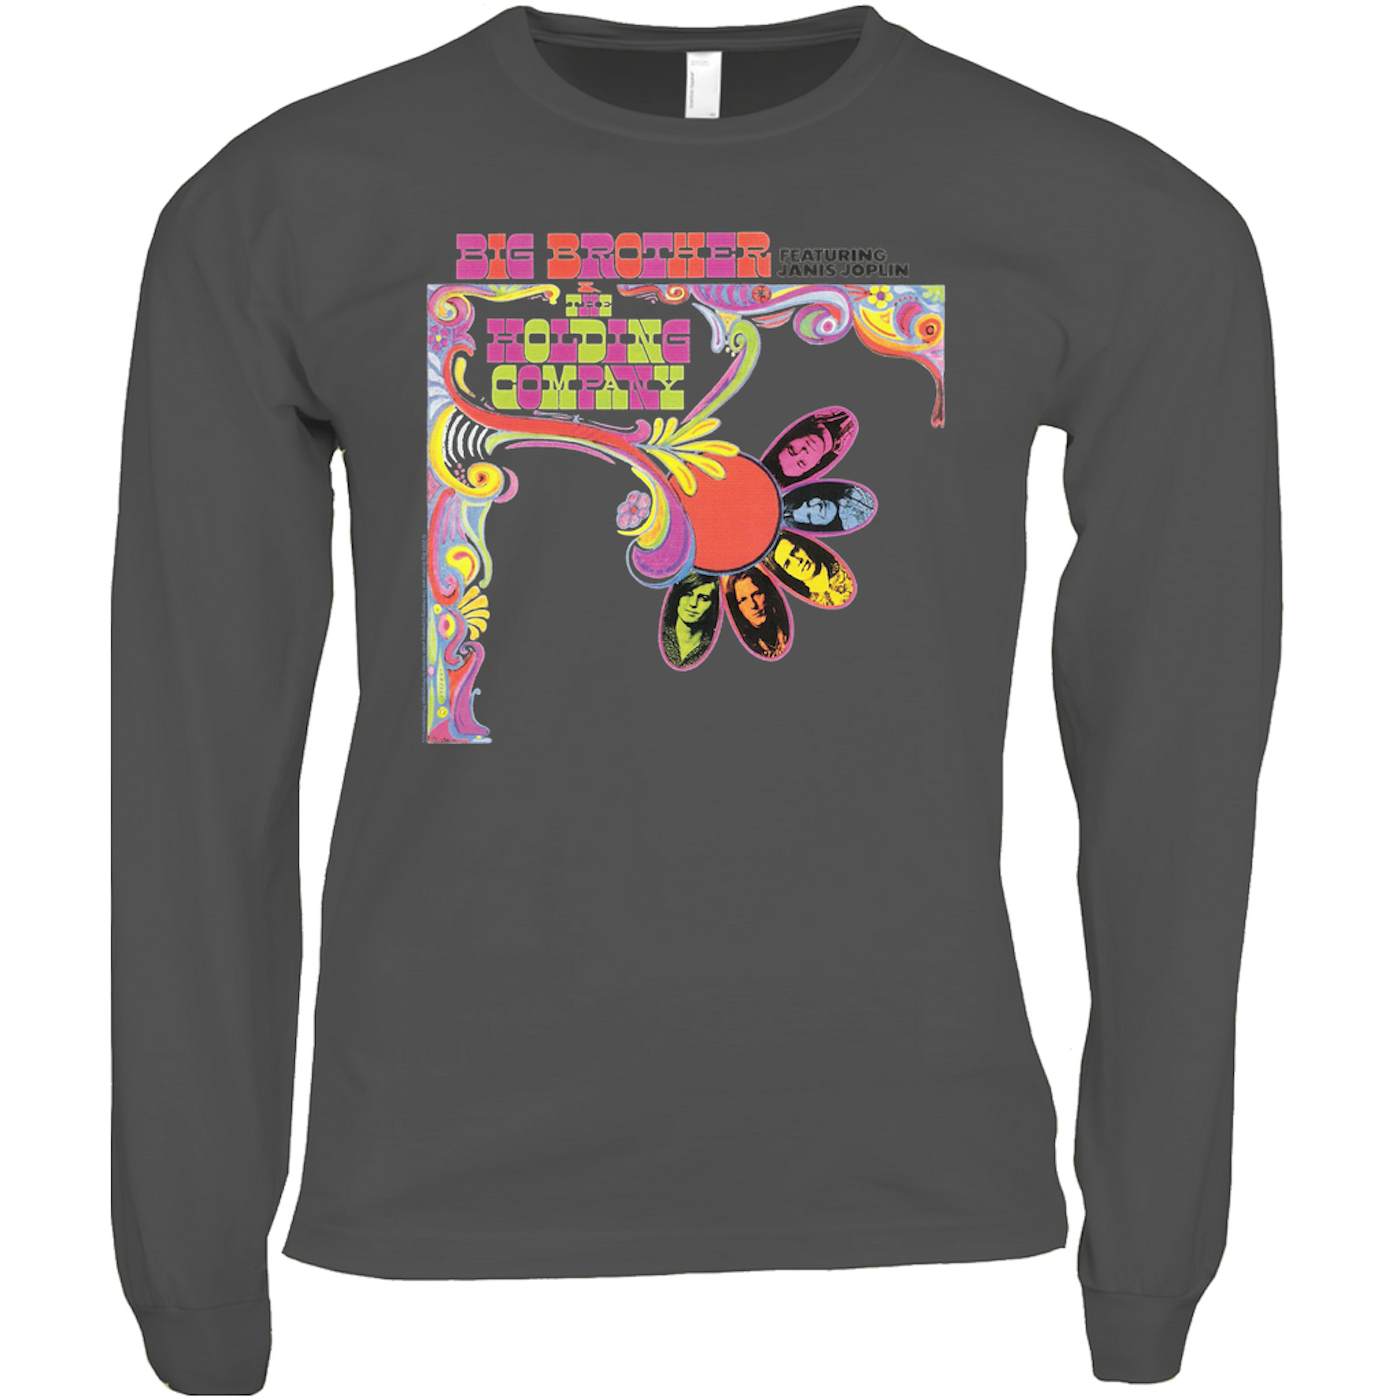 Big Brother and The Holding Co. Long Sleeve Shirt | Big Brother & The Holding Company Feat. Janis Joplin Album Cover Big Brother and The Holding Co. Shirt